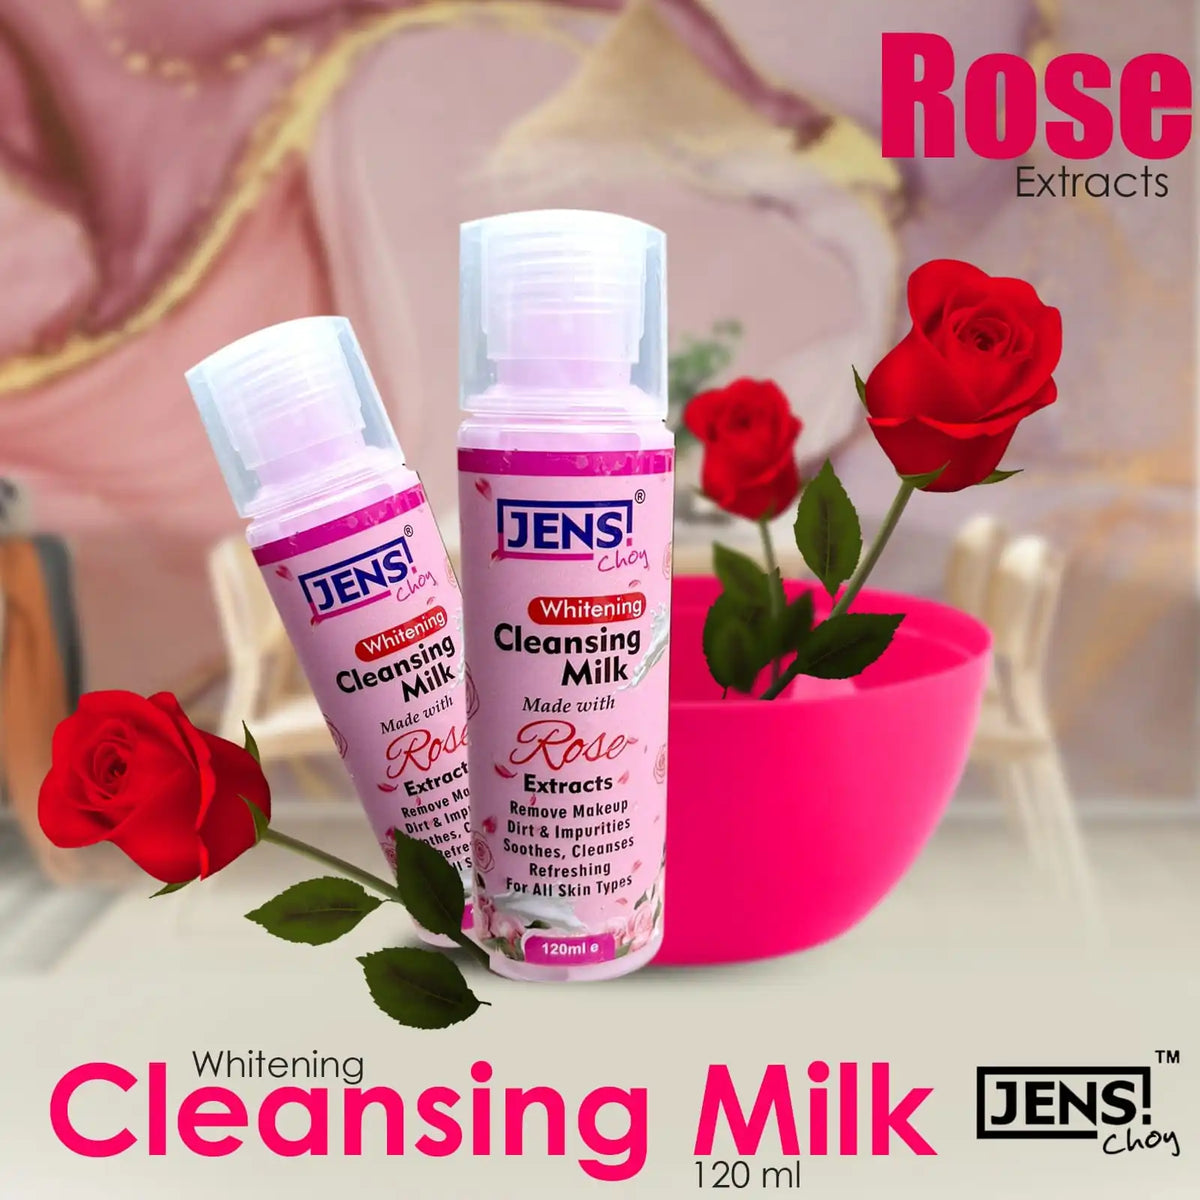 Jens Choy Whitening Cleansing Milk Enriched with Rose Extracts